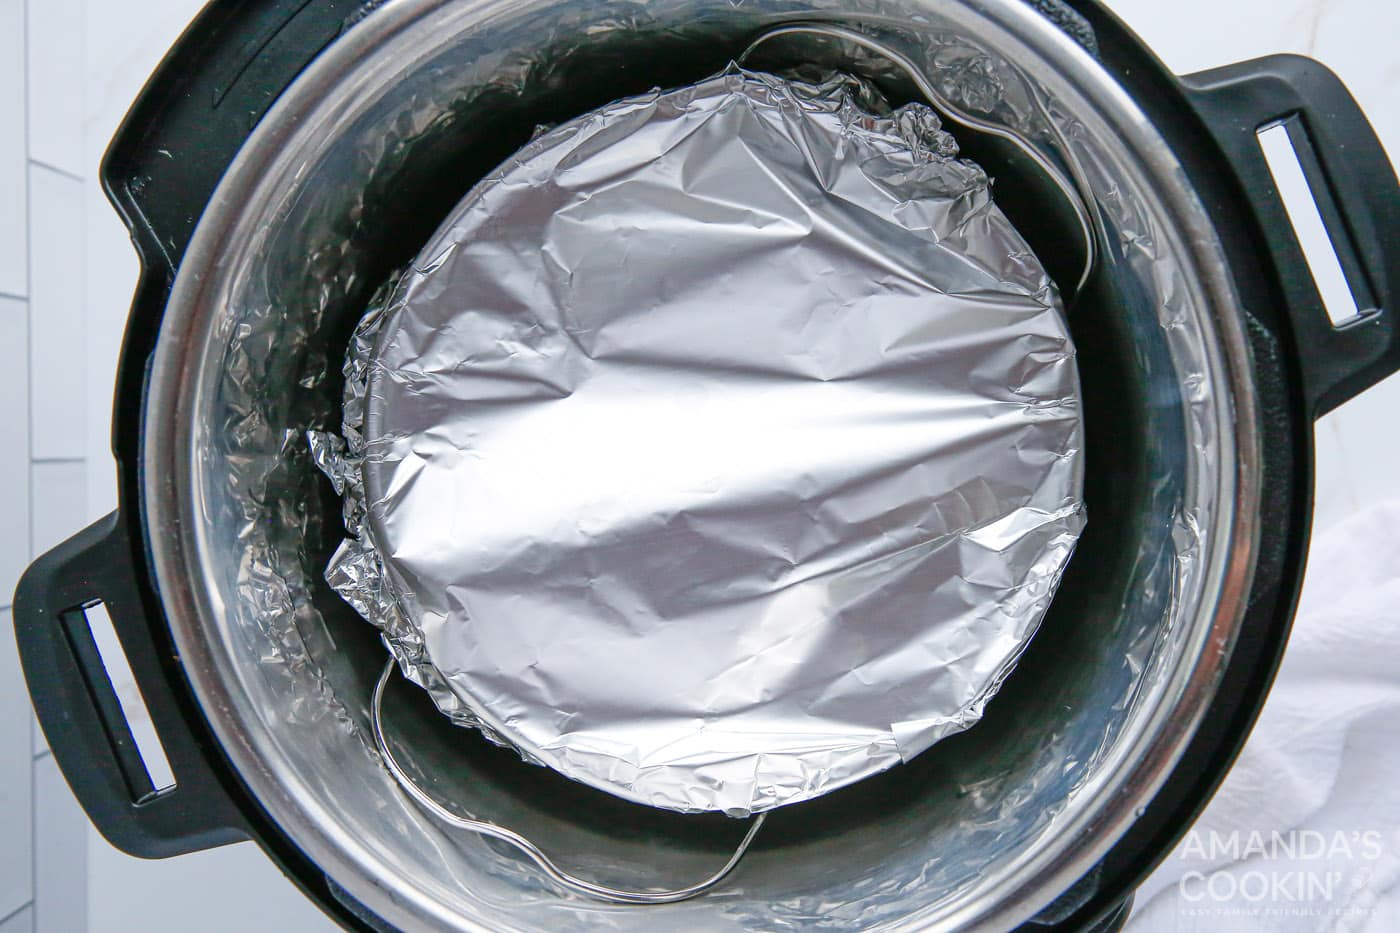 foil wrapped cheesecake in the instant pot